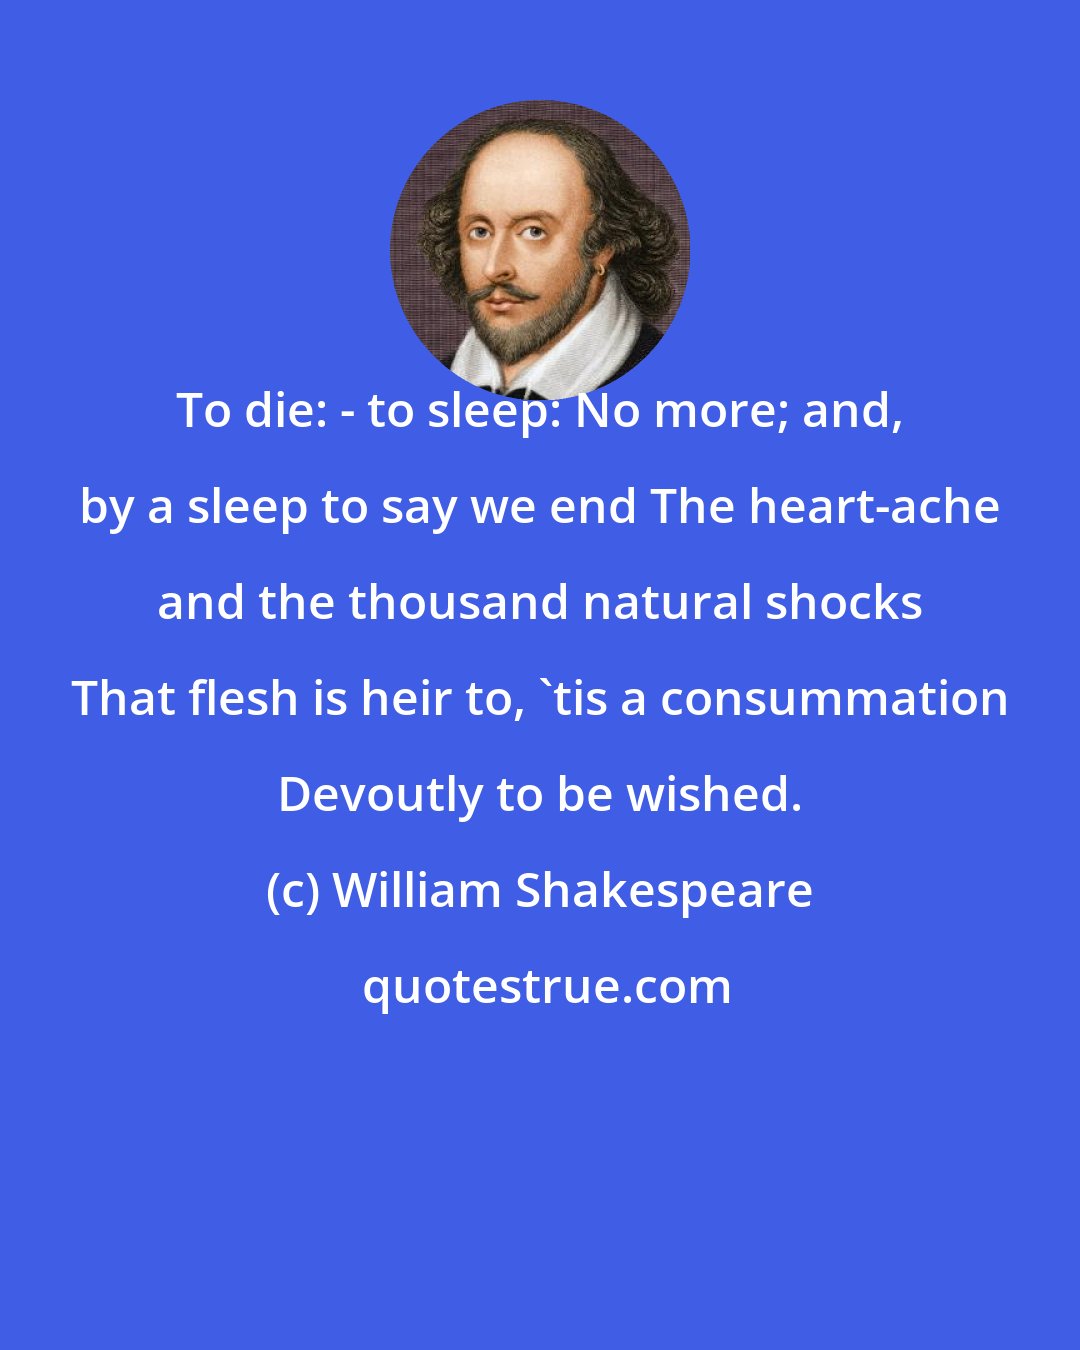 William Shakespeare: To die: - to sleep: No more; and, by a sleep to say we end The heart-ache and the thousand natural shocks That flesh is heir to, 'tis a consummation Devoutly to be wished.